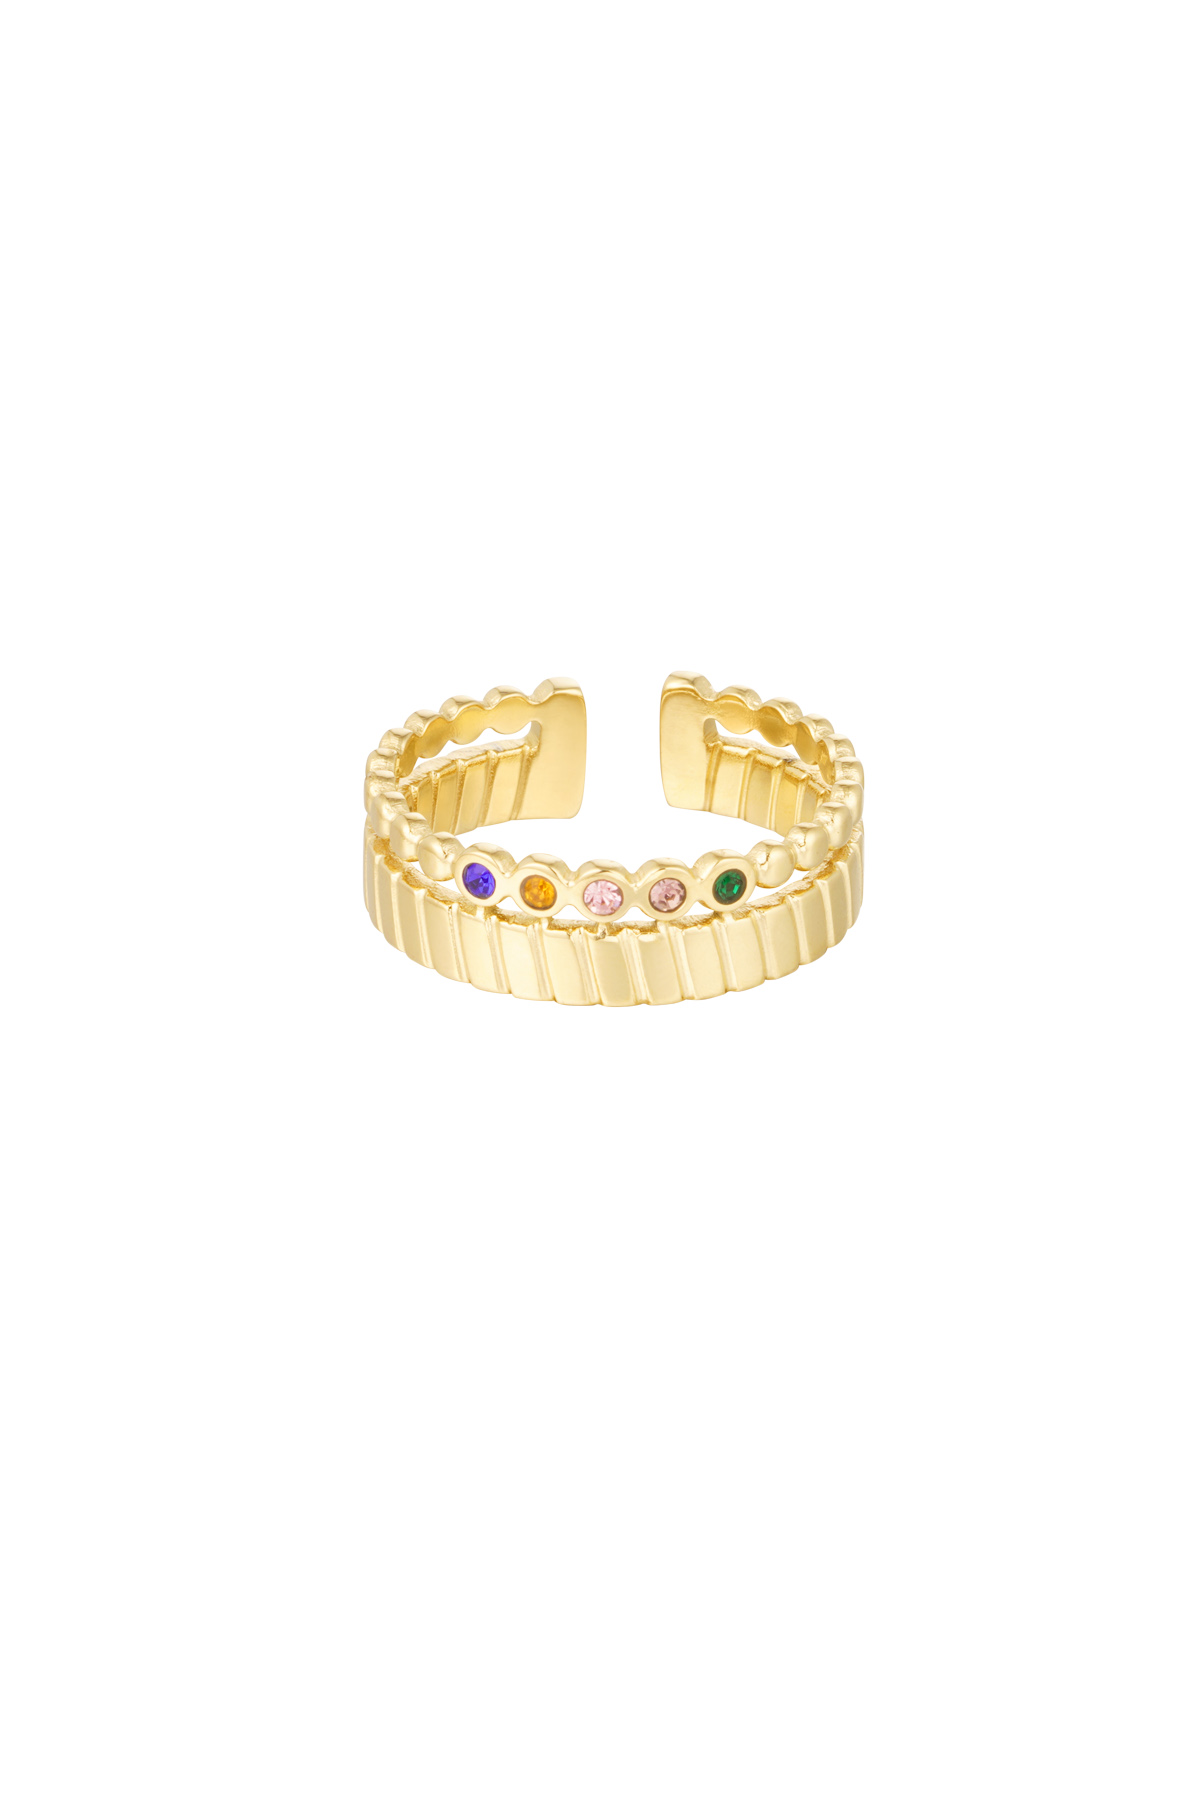 Ring stripes with stones - gold/multi h5 